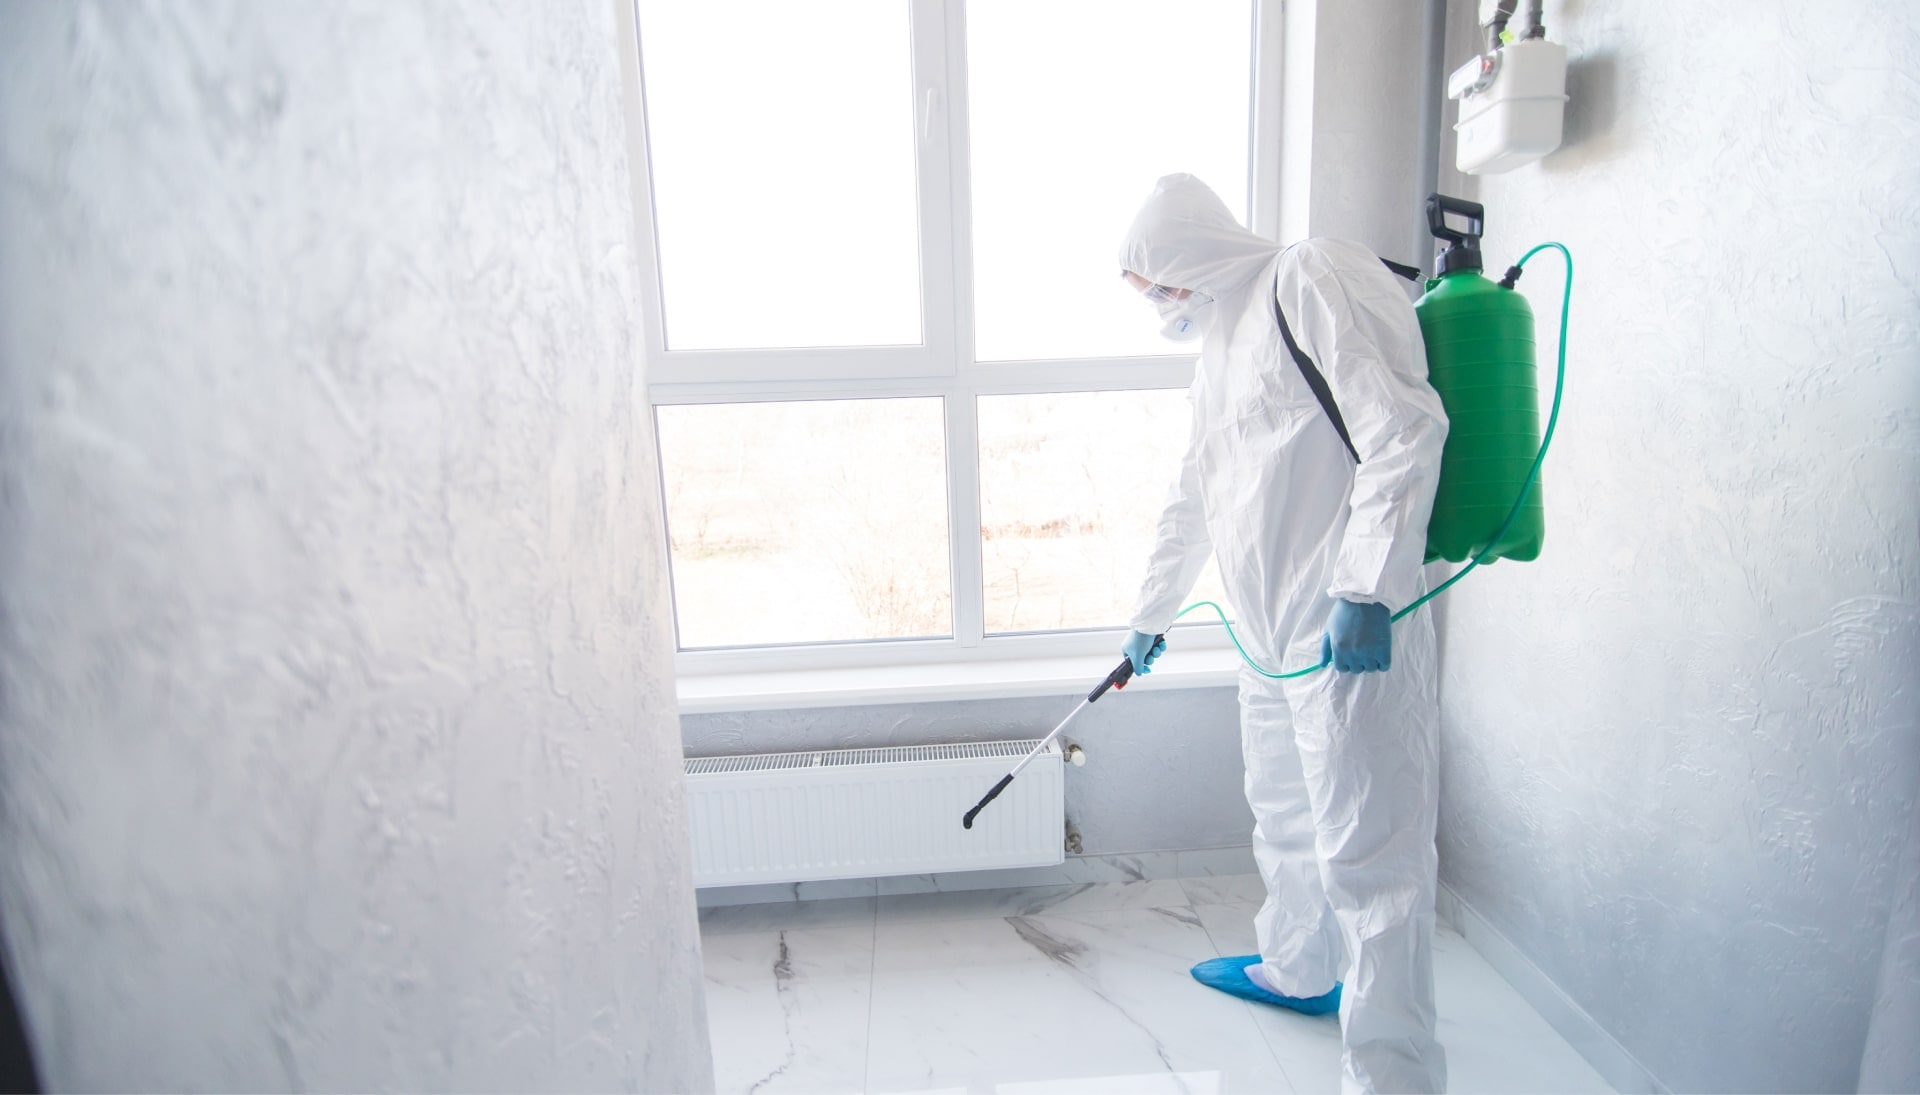 We provide the highest-quality mold inspection, testing, and removal services in the Raleigh, North Carolina area.